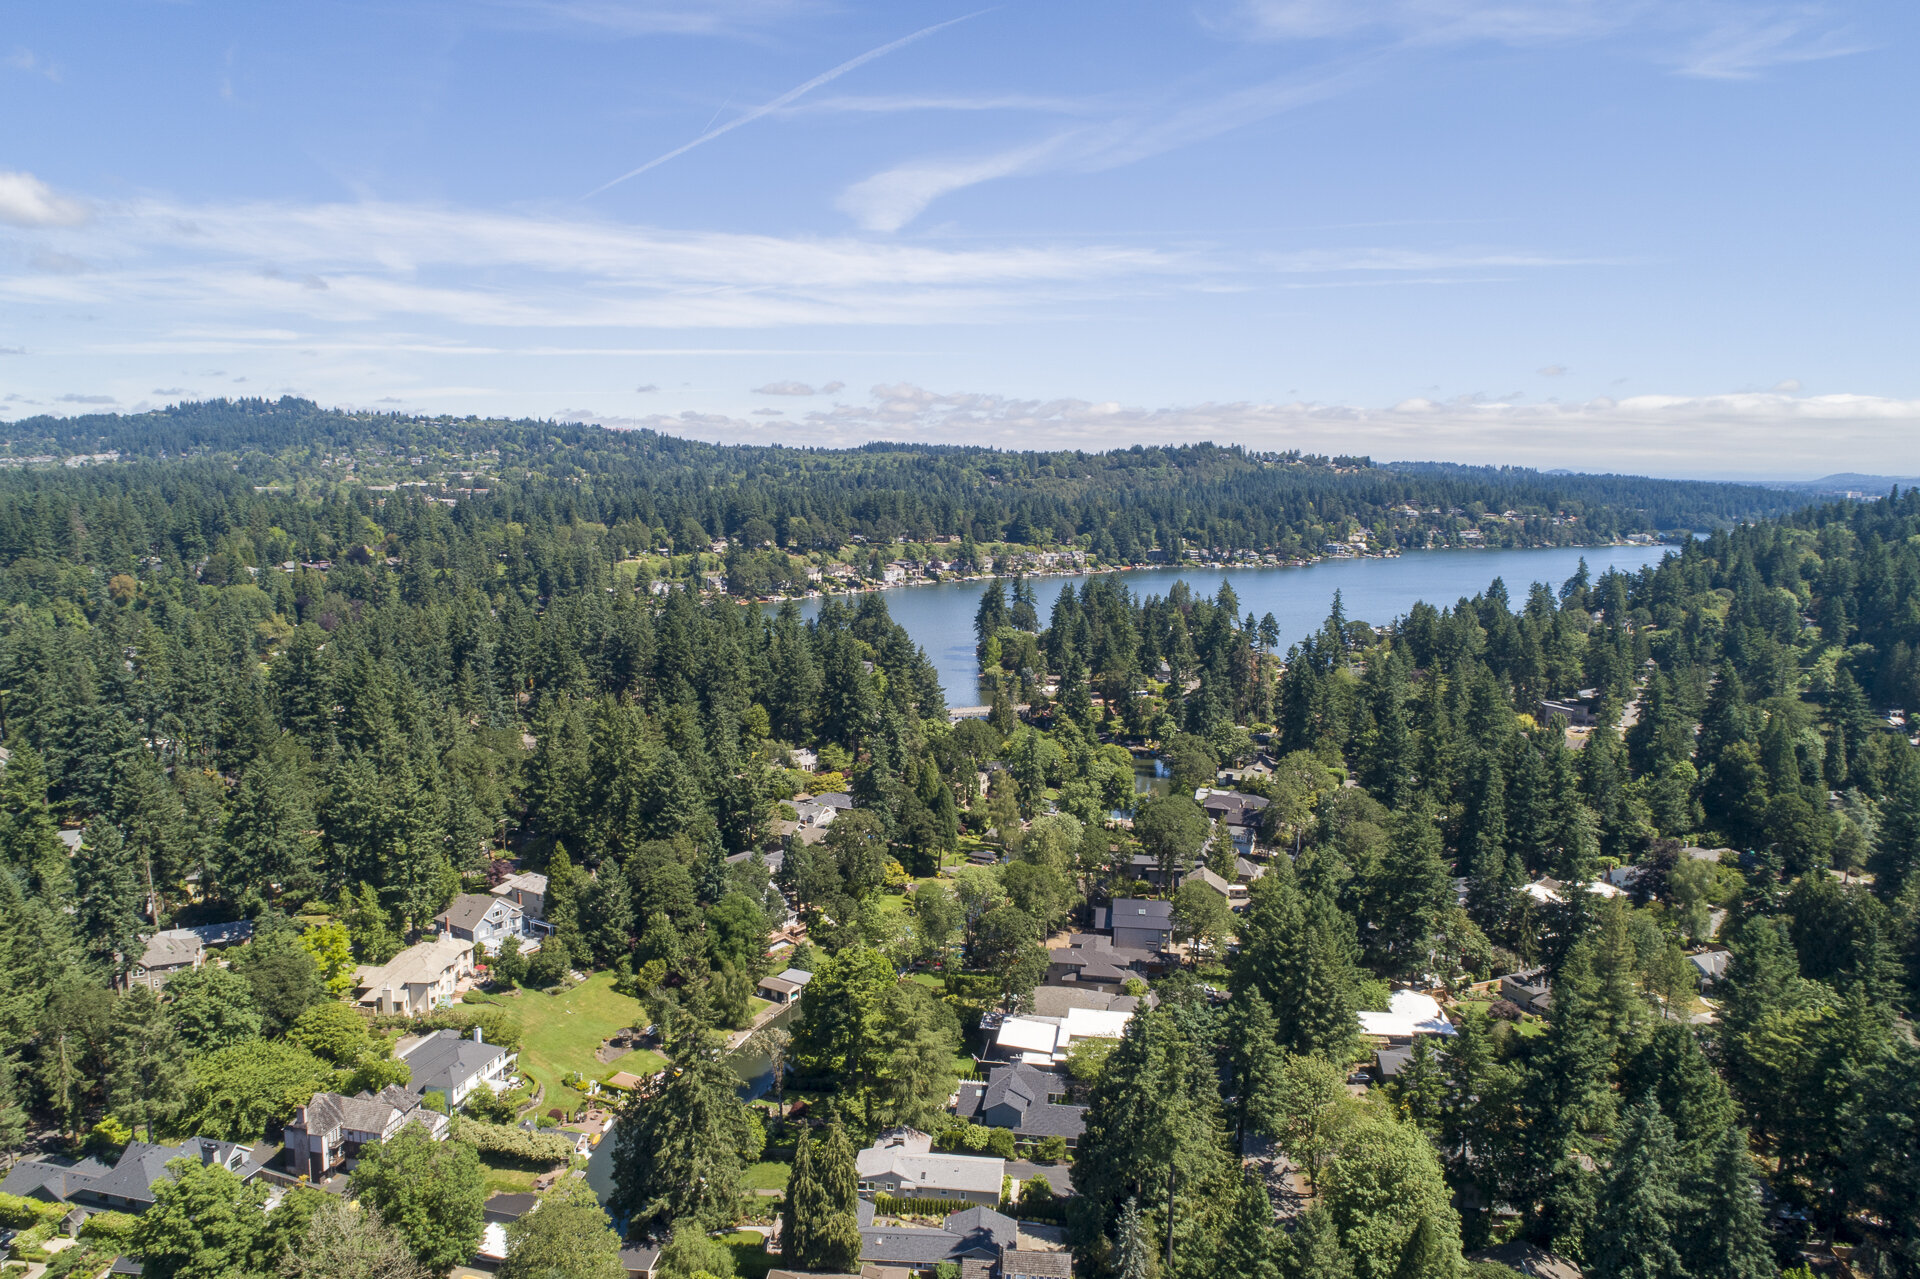 A Drone View of Lake Oswego